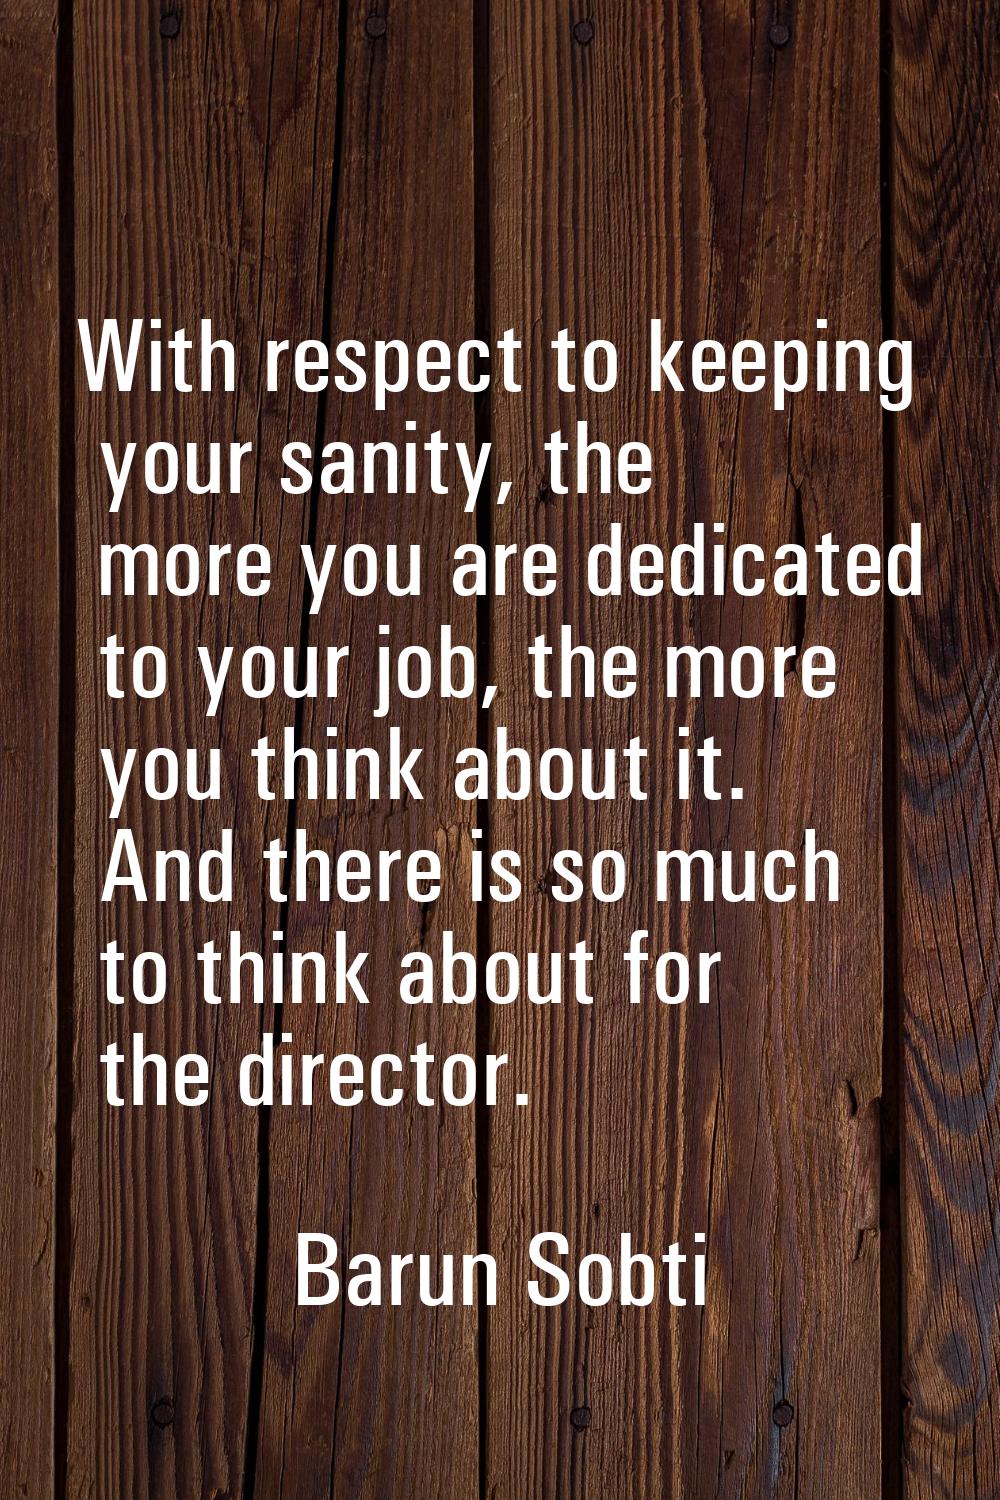 With respect to keeping your sanity, the more you are dedicated to your job, the more you think abo